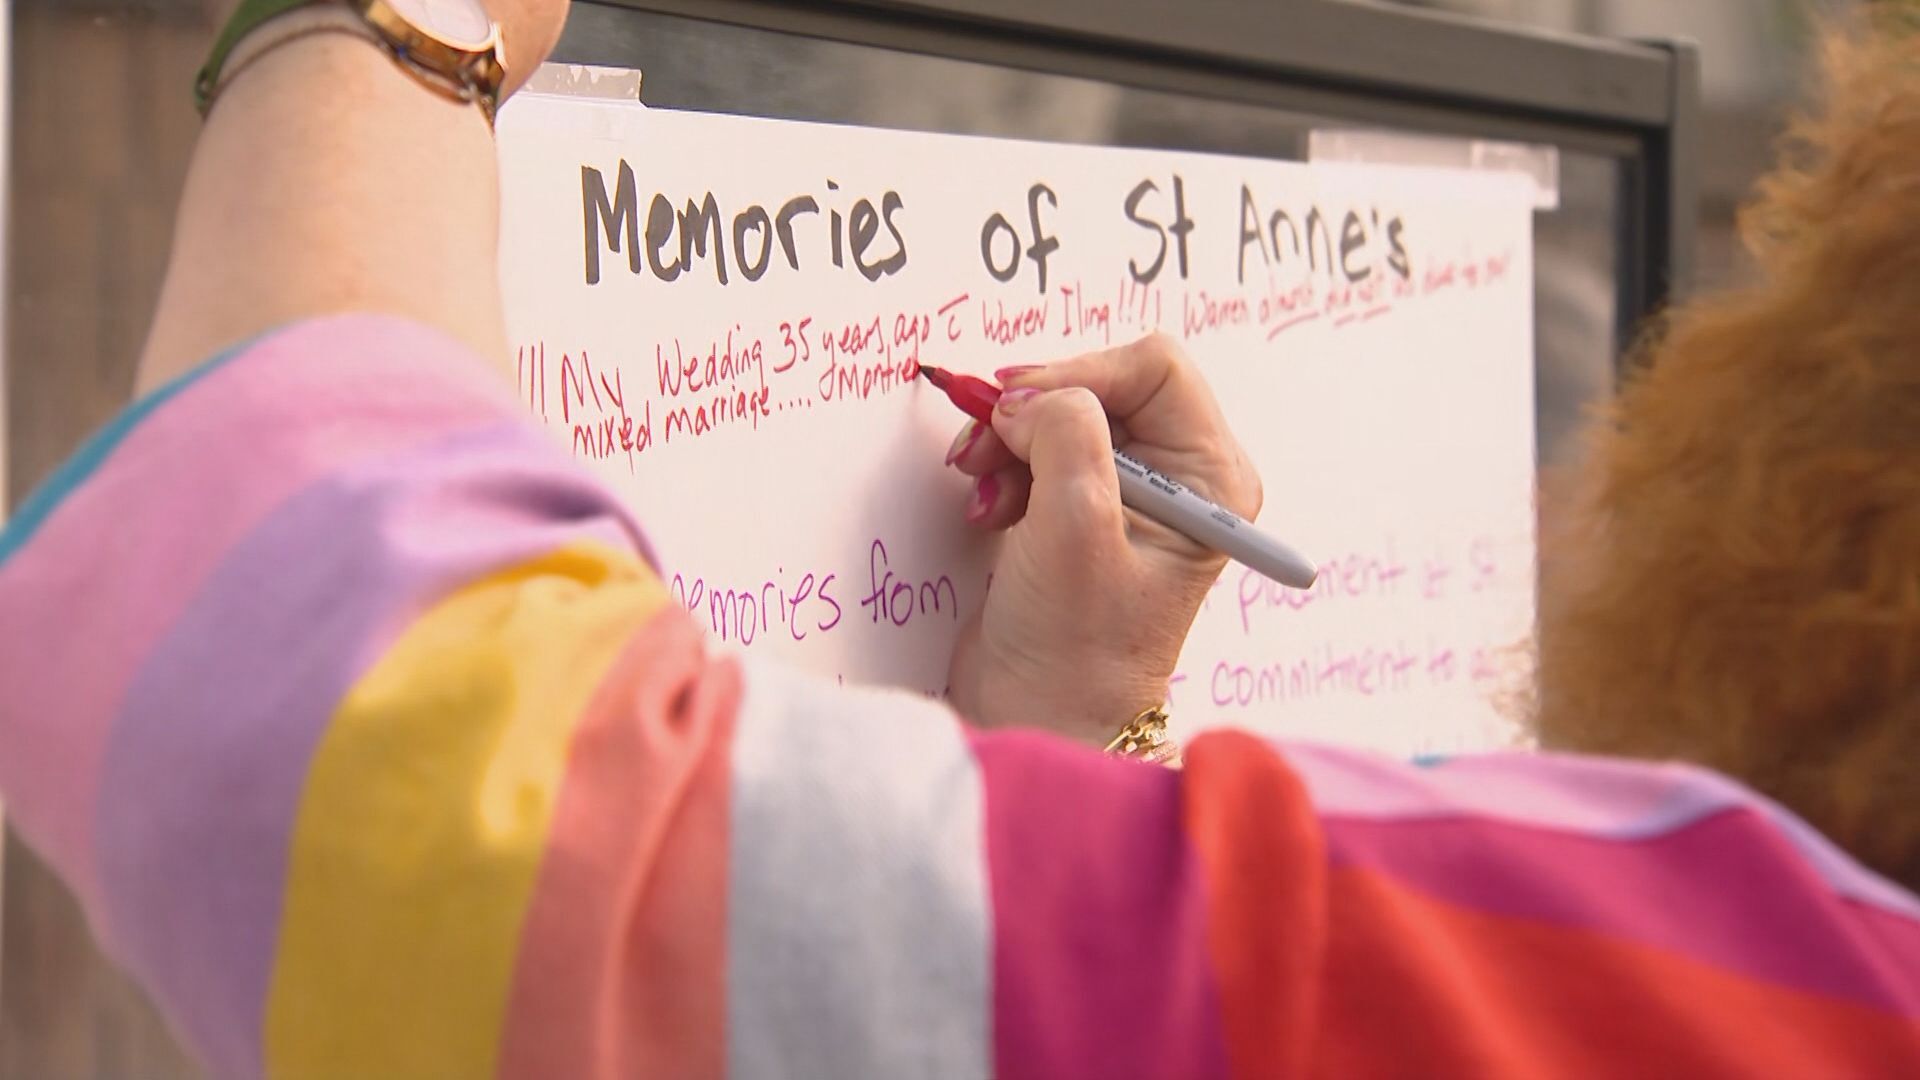 Vigil held to mourn the loss of St. Anne's church